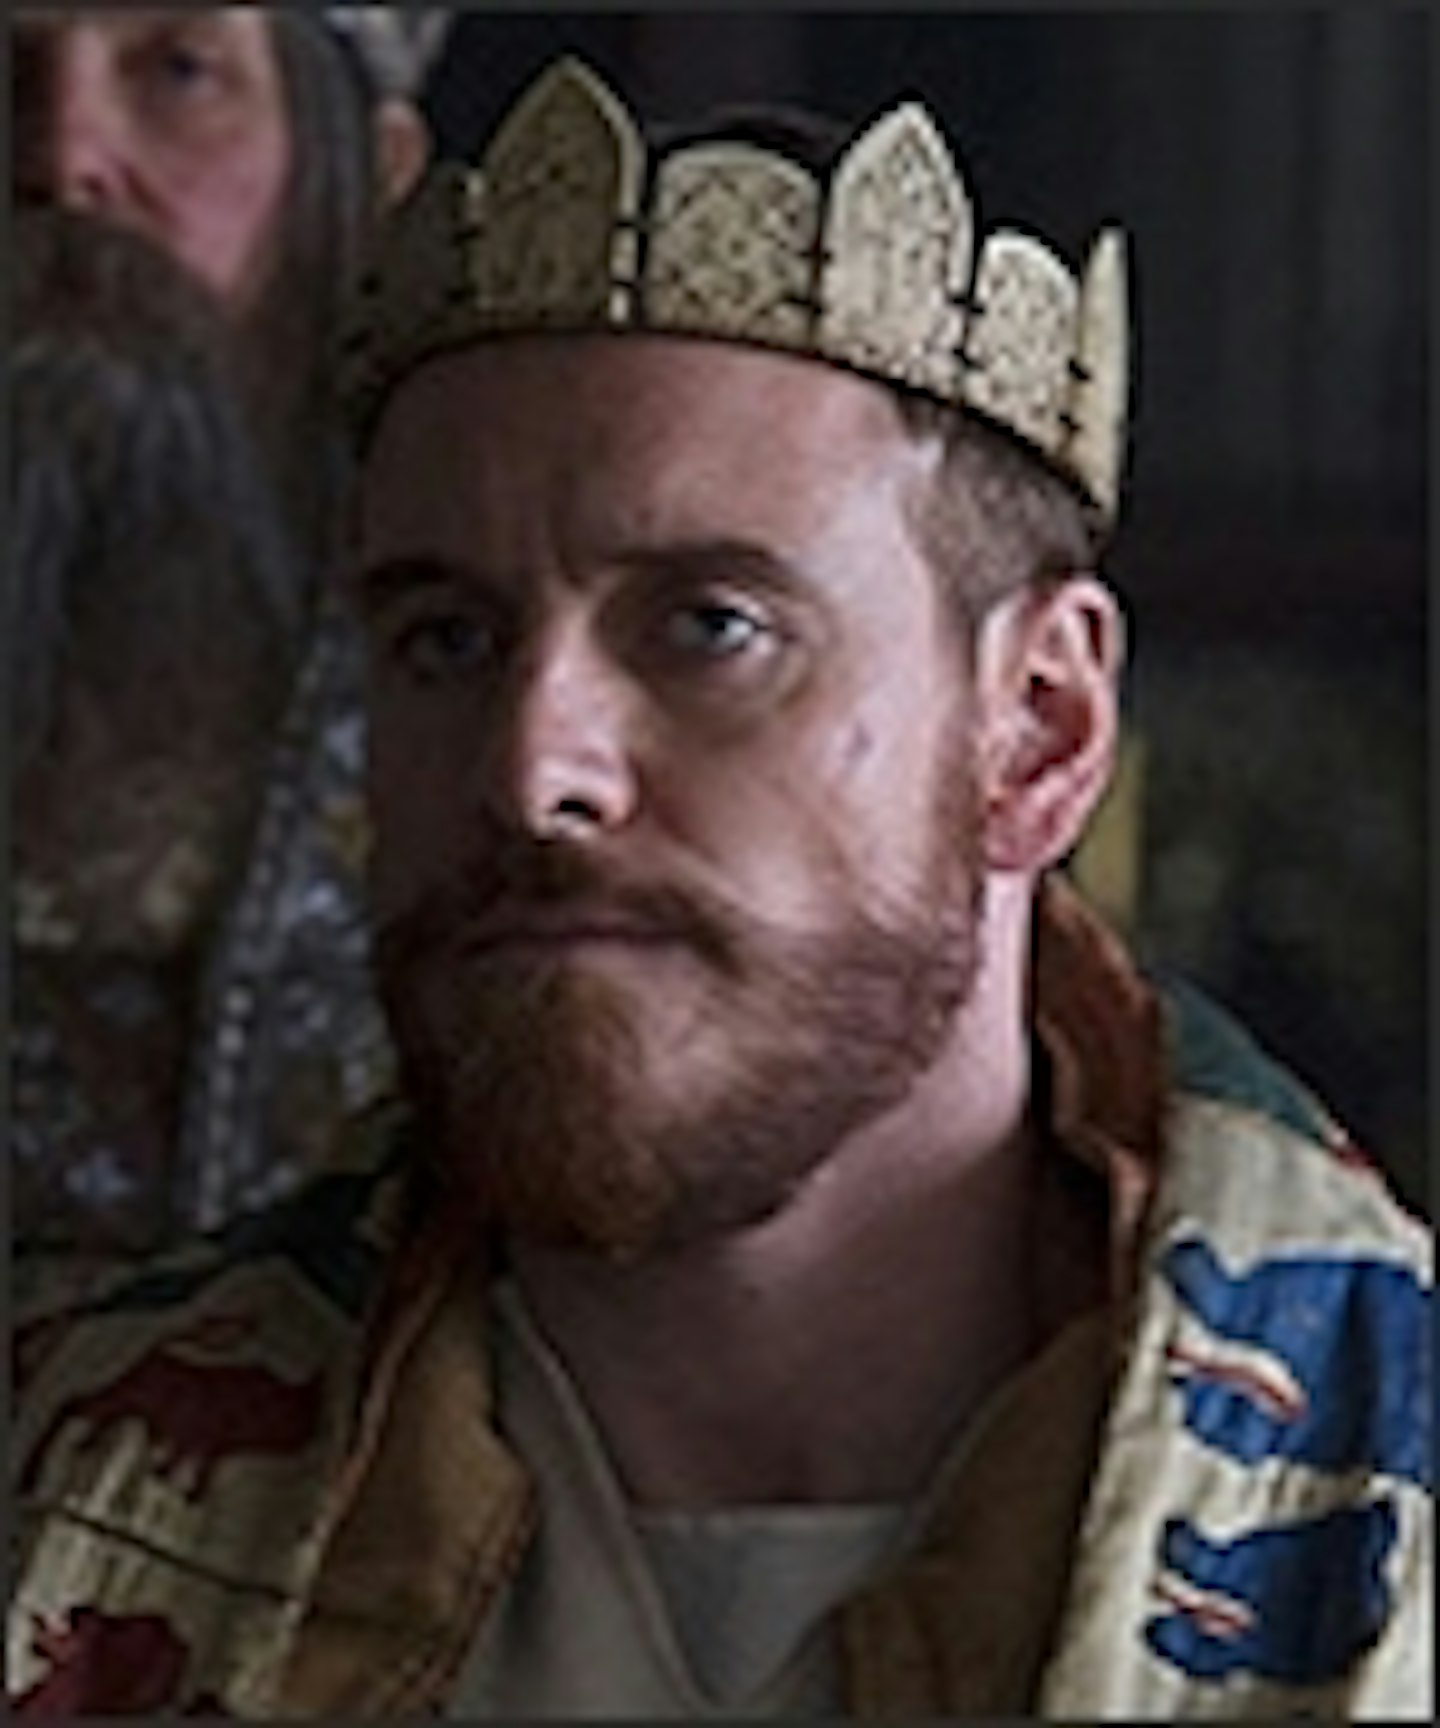 Two New Clips Of Michael Fassbender's Macbeth